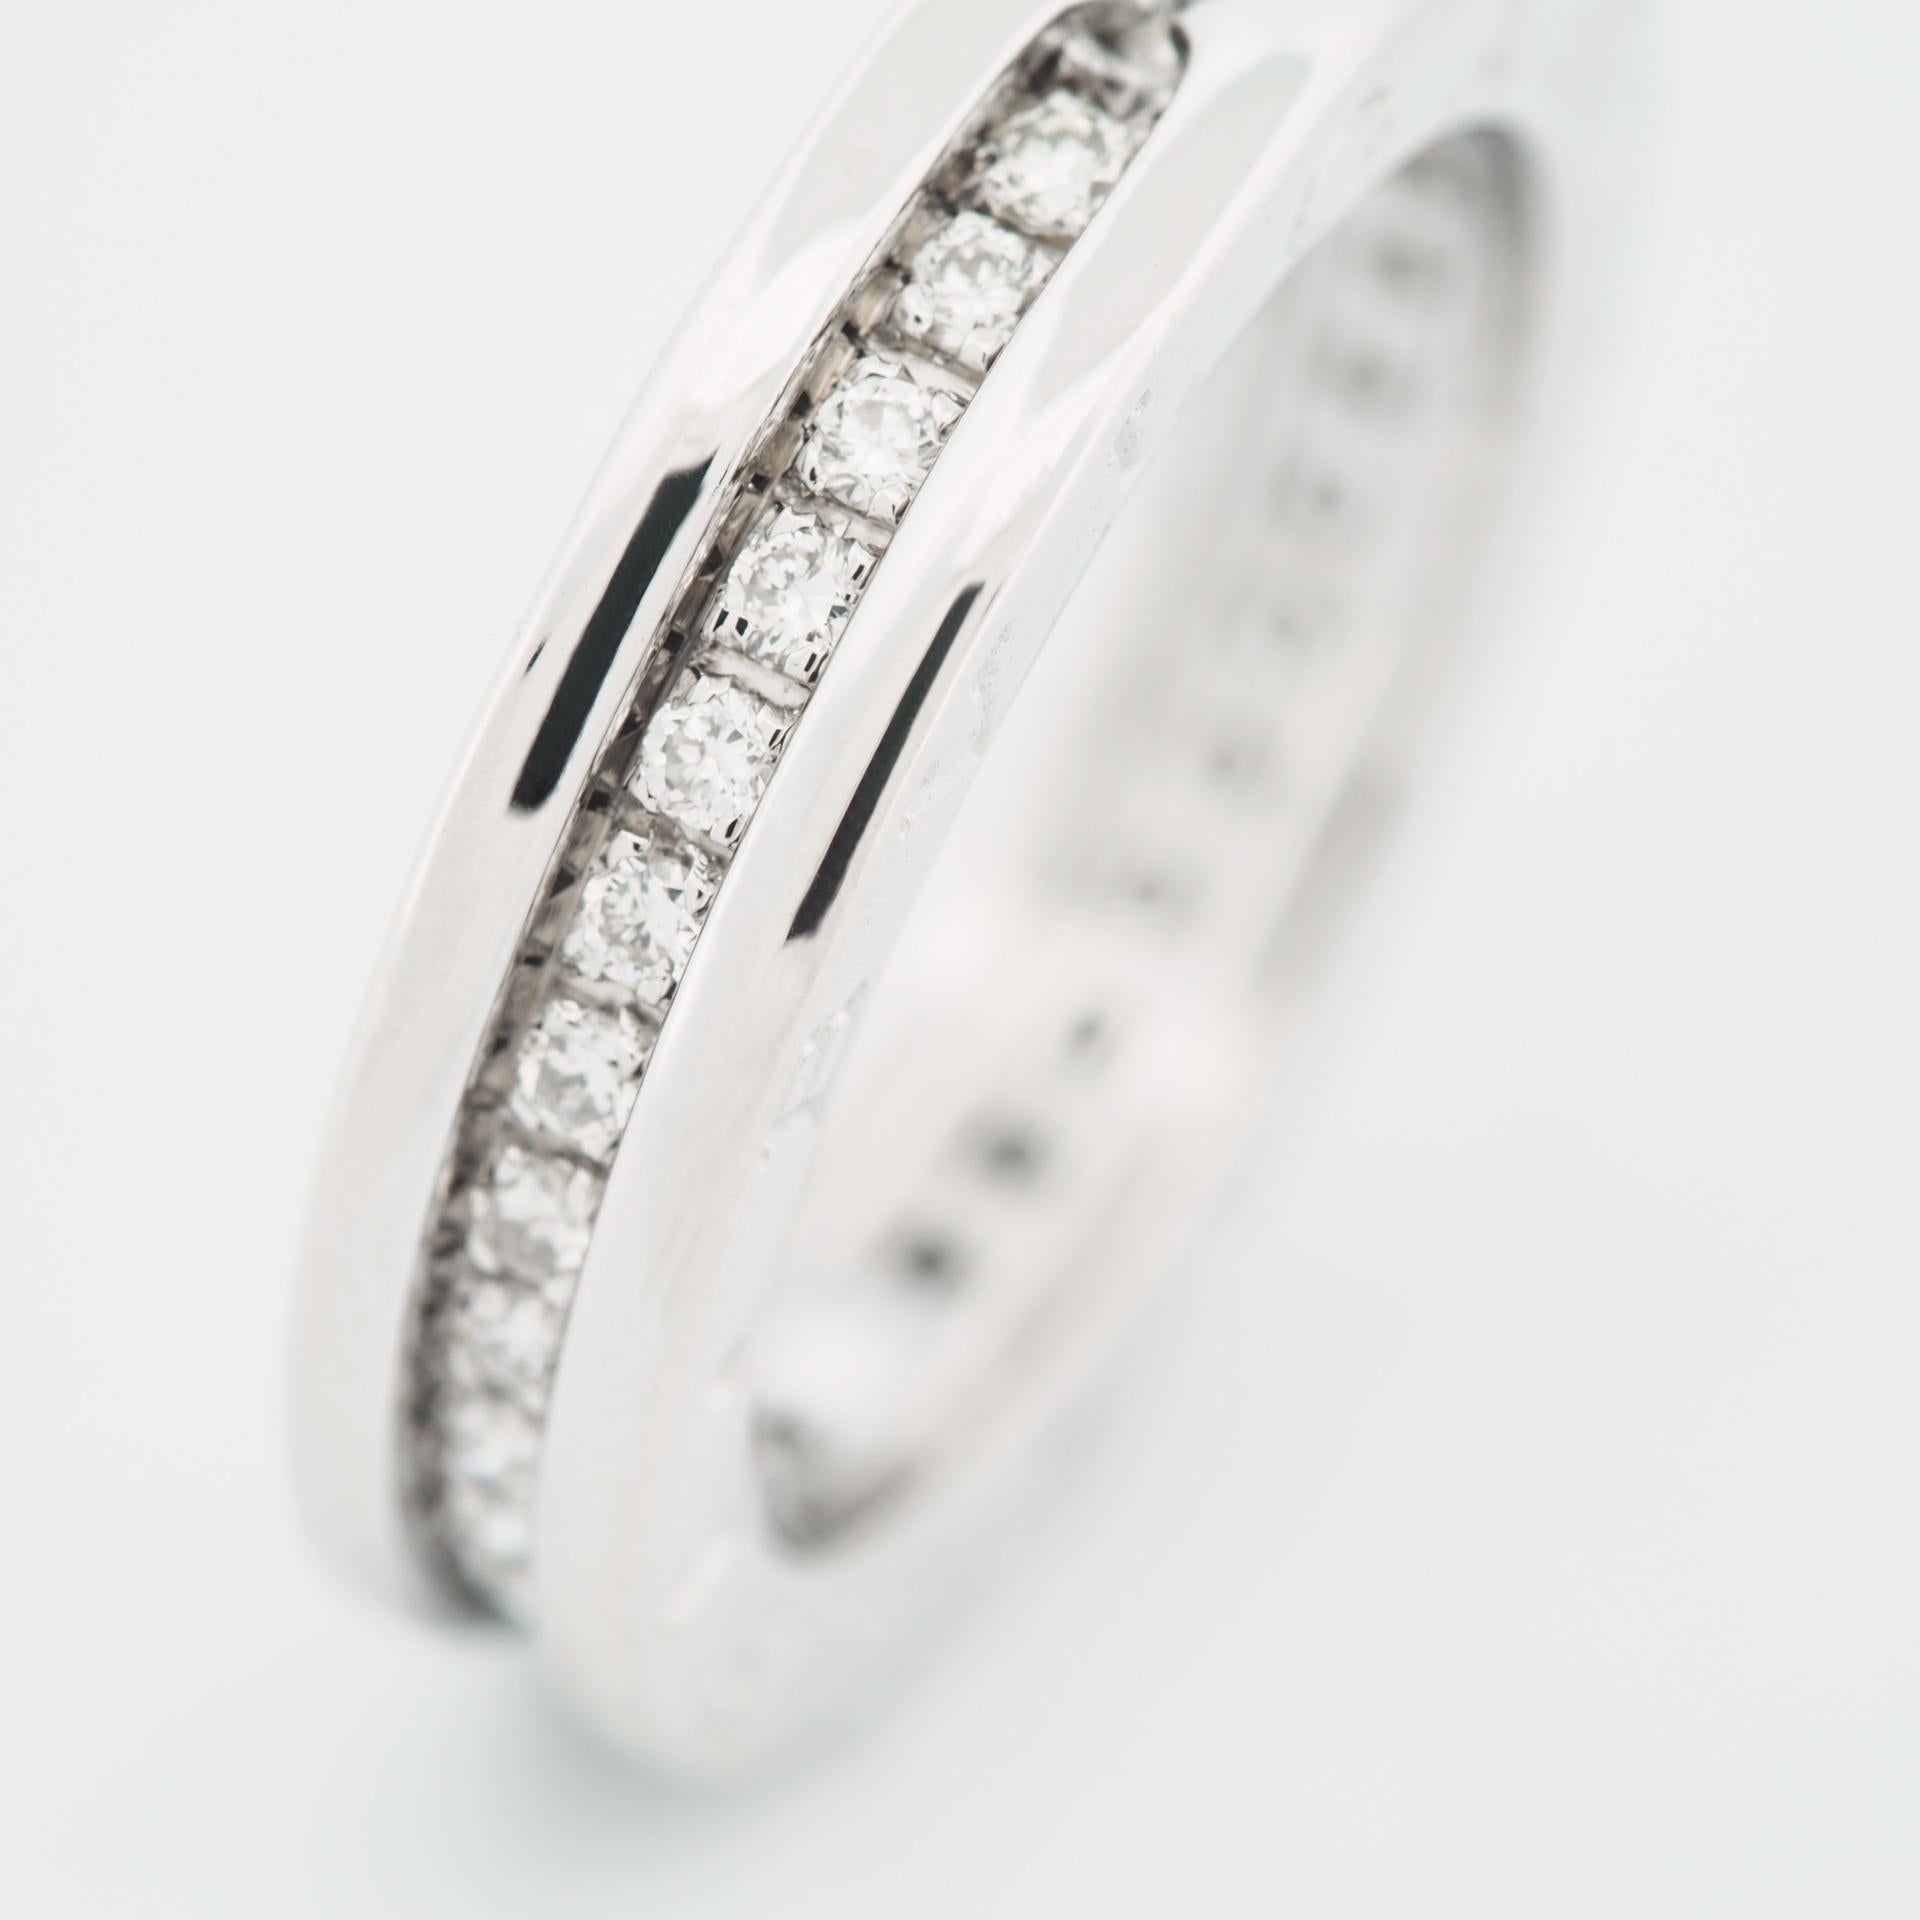 Bvlgari B.Zero 1 Ring With 0.48ct Diamonds Ring White Gold 53 US 6.75 In Good Condition For Sale In Kobe, Hyogo